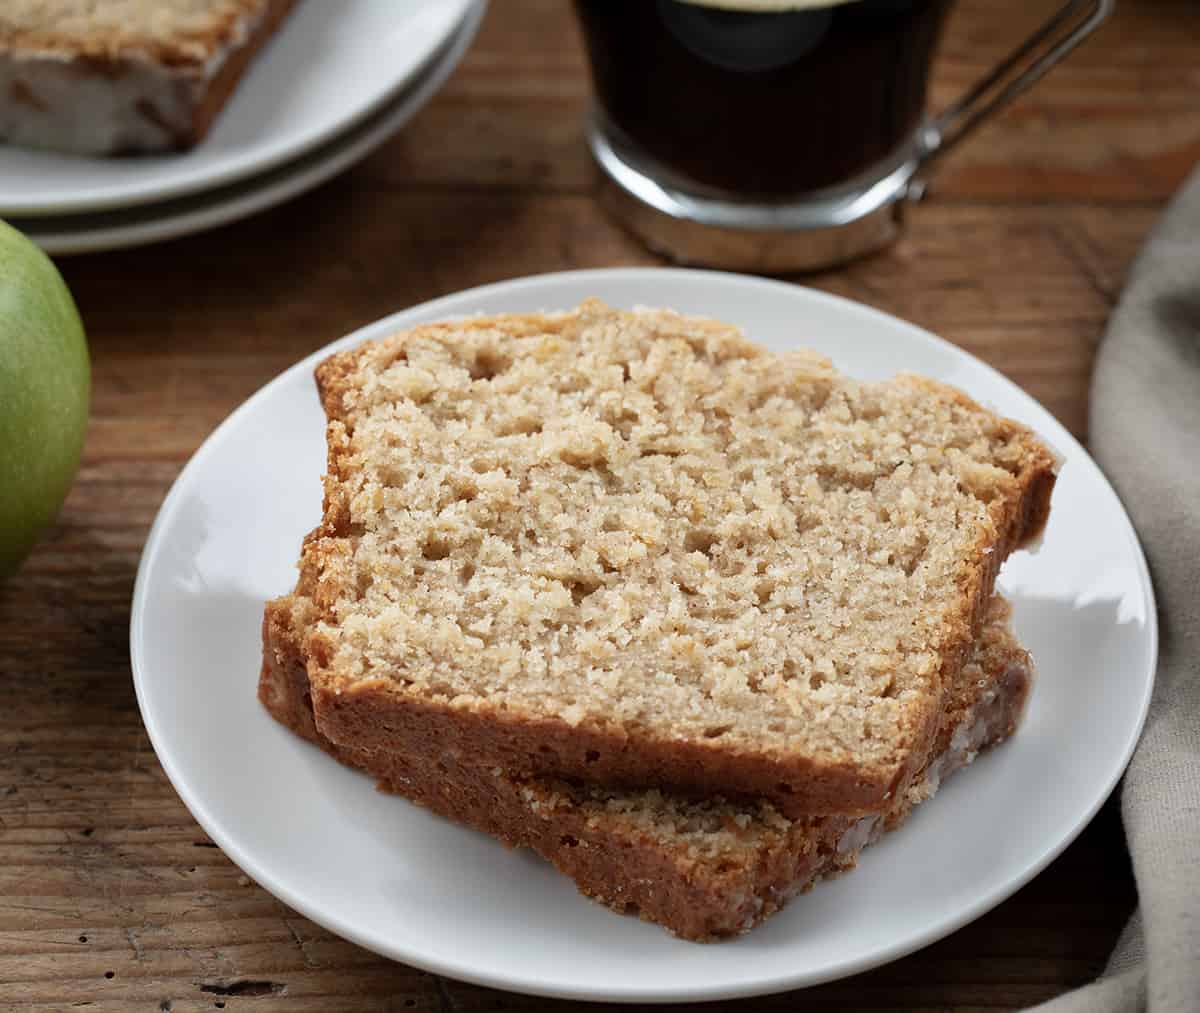 Slices of Applesauce Bread on a plate next to coffee.